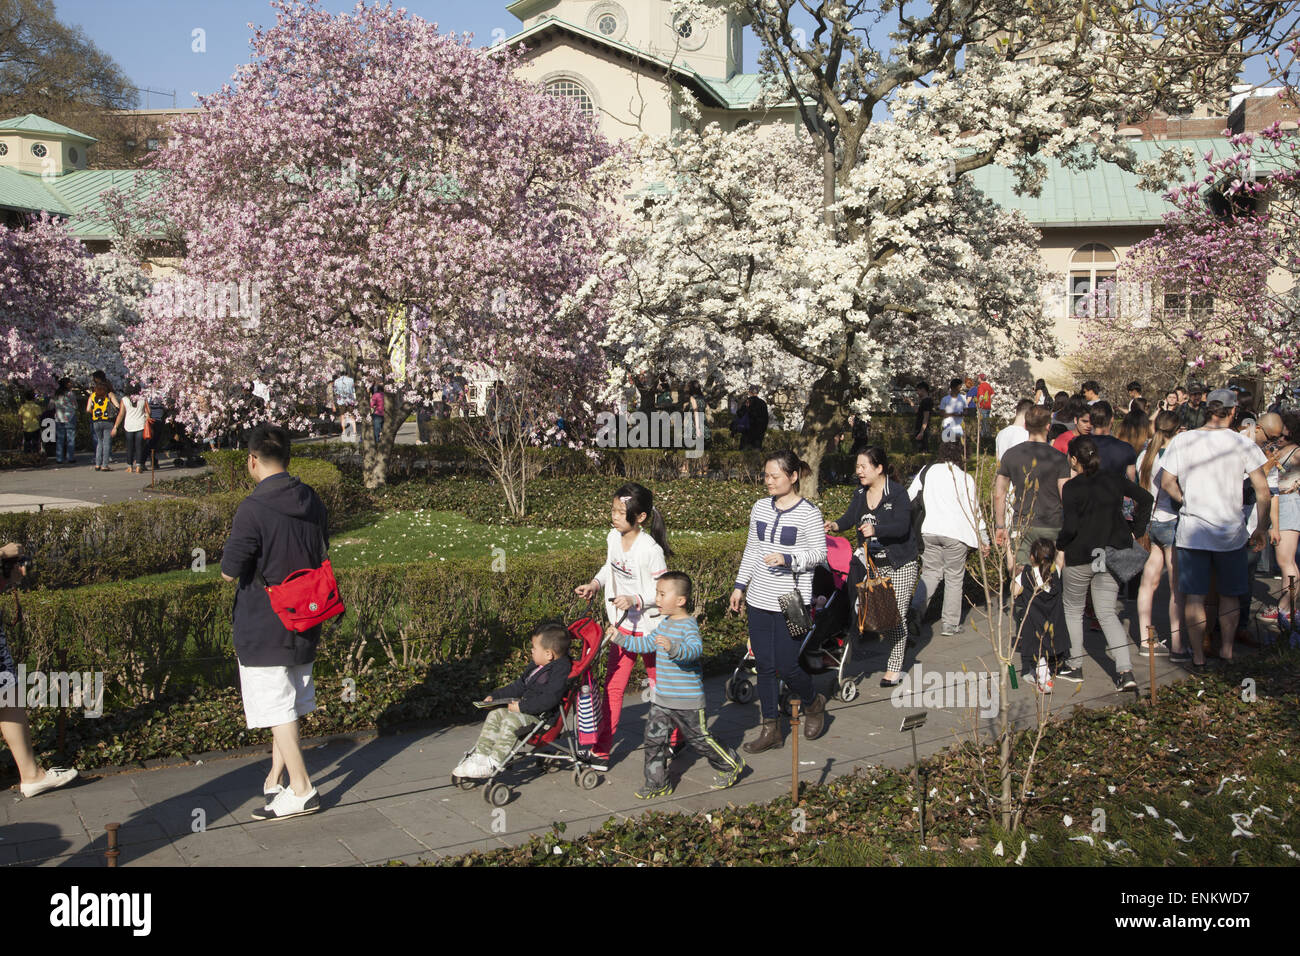 Spring time at the Brooklyn Botanic Garden with the blooming Magnolias in the background. Stock Photo